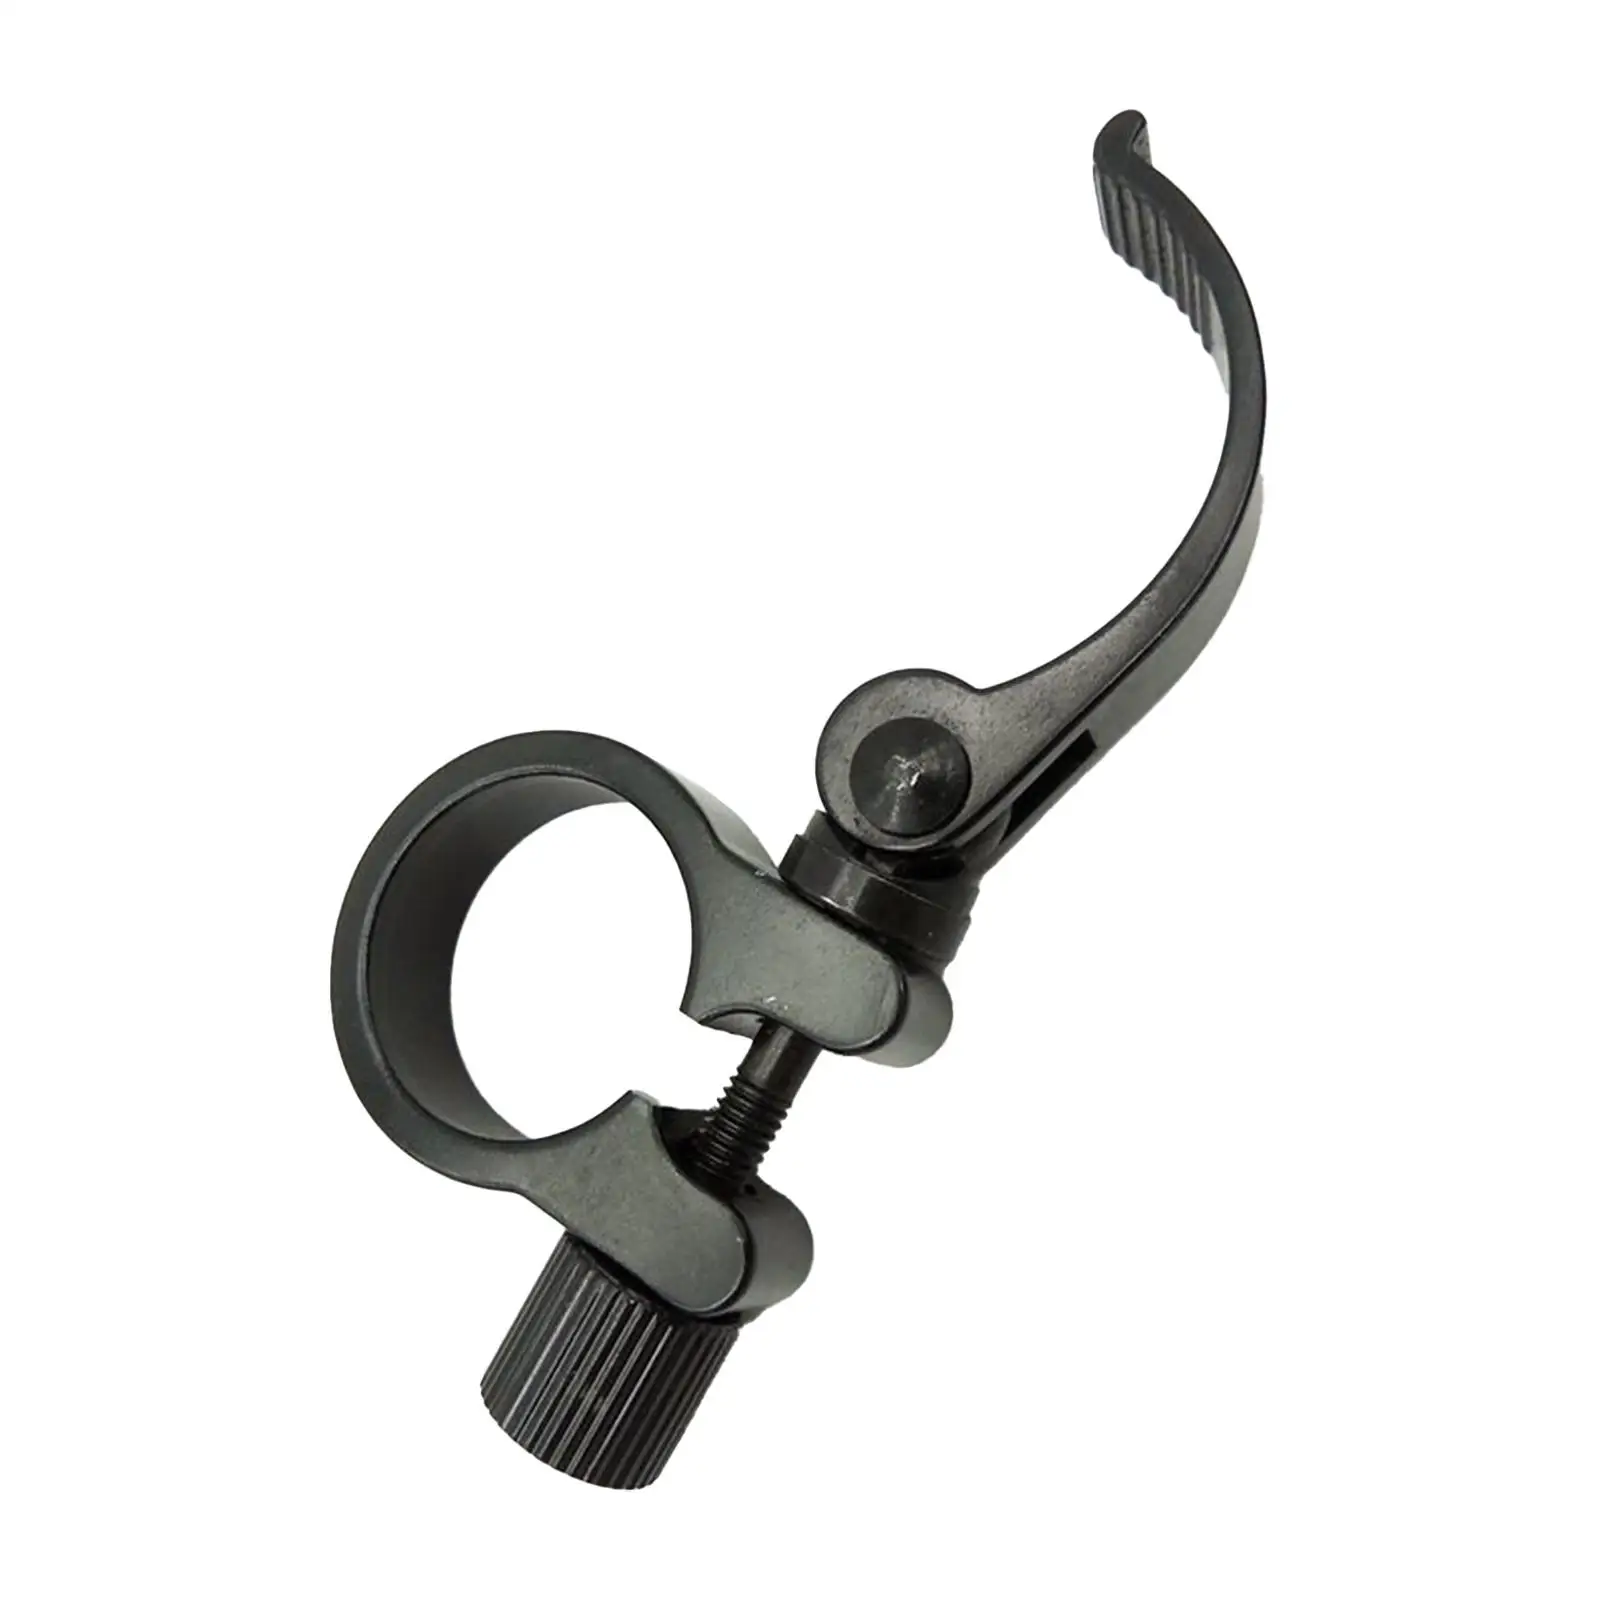 Bicycle Seat Tube Mount Clip Premium Universal Bicycle Seatpost Clamp Quick Release Bike Seat Tube Clamp for Road Bicycle Parts